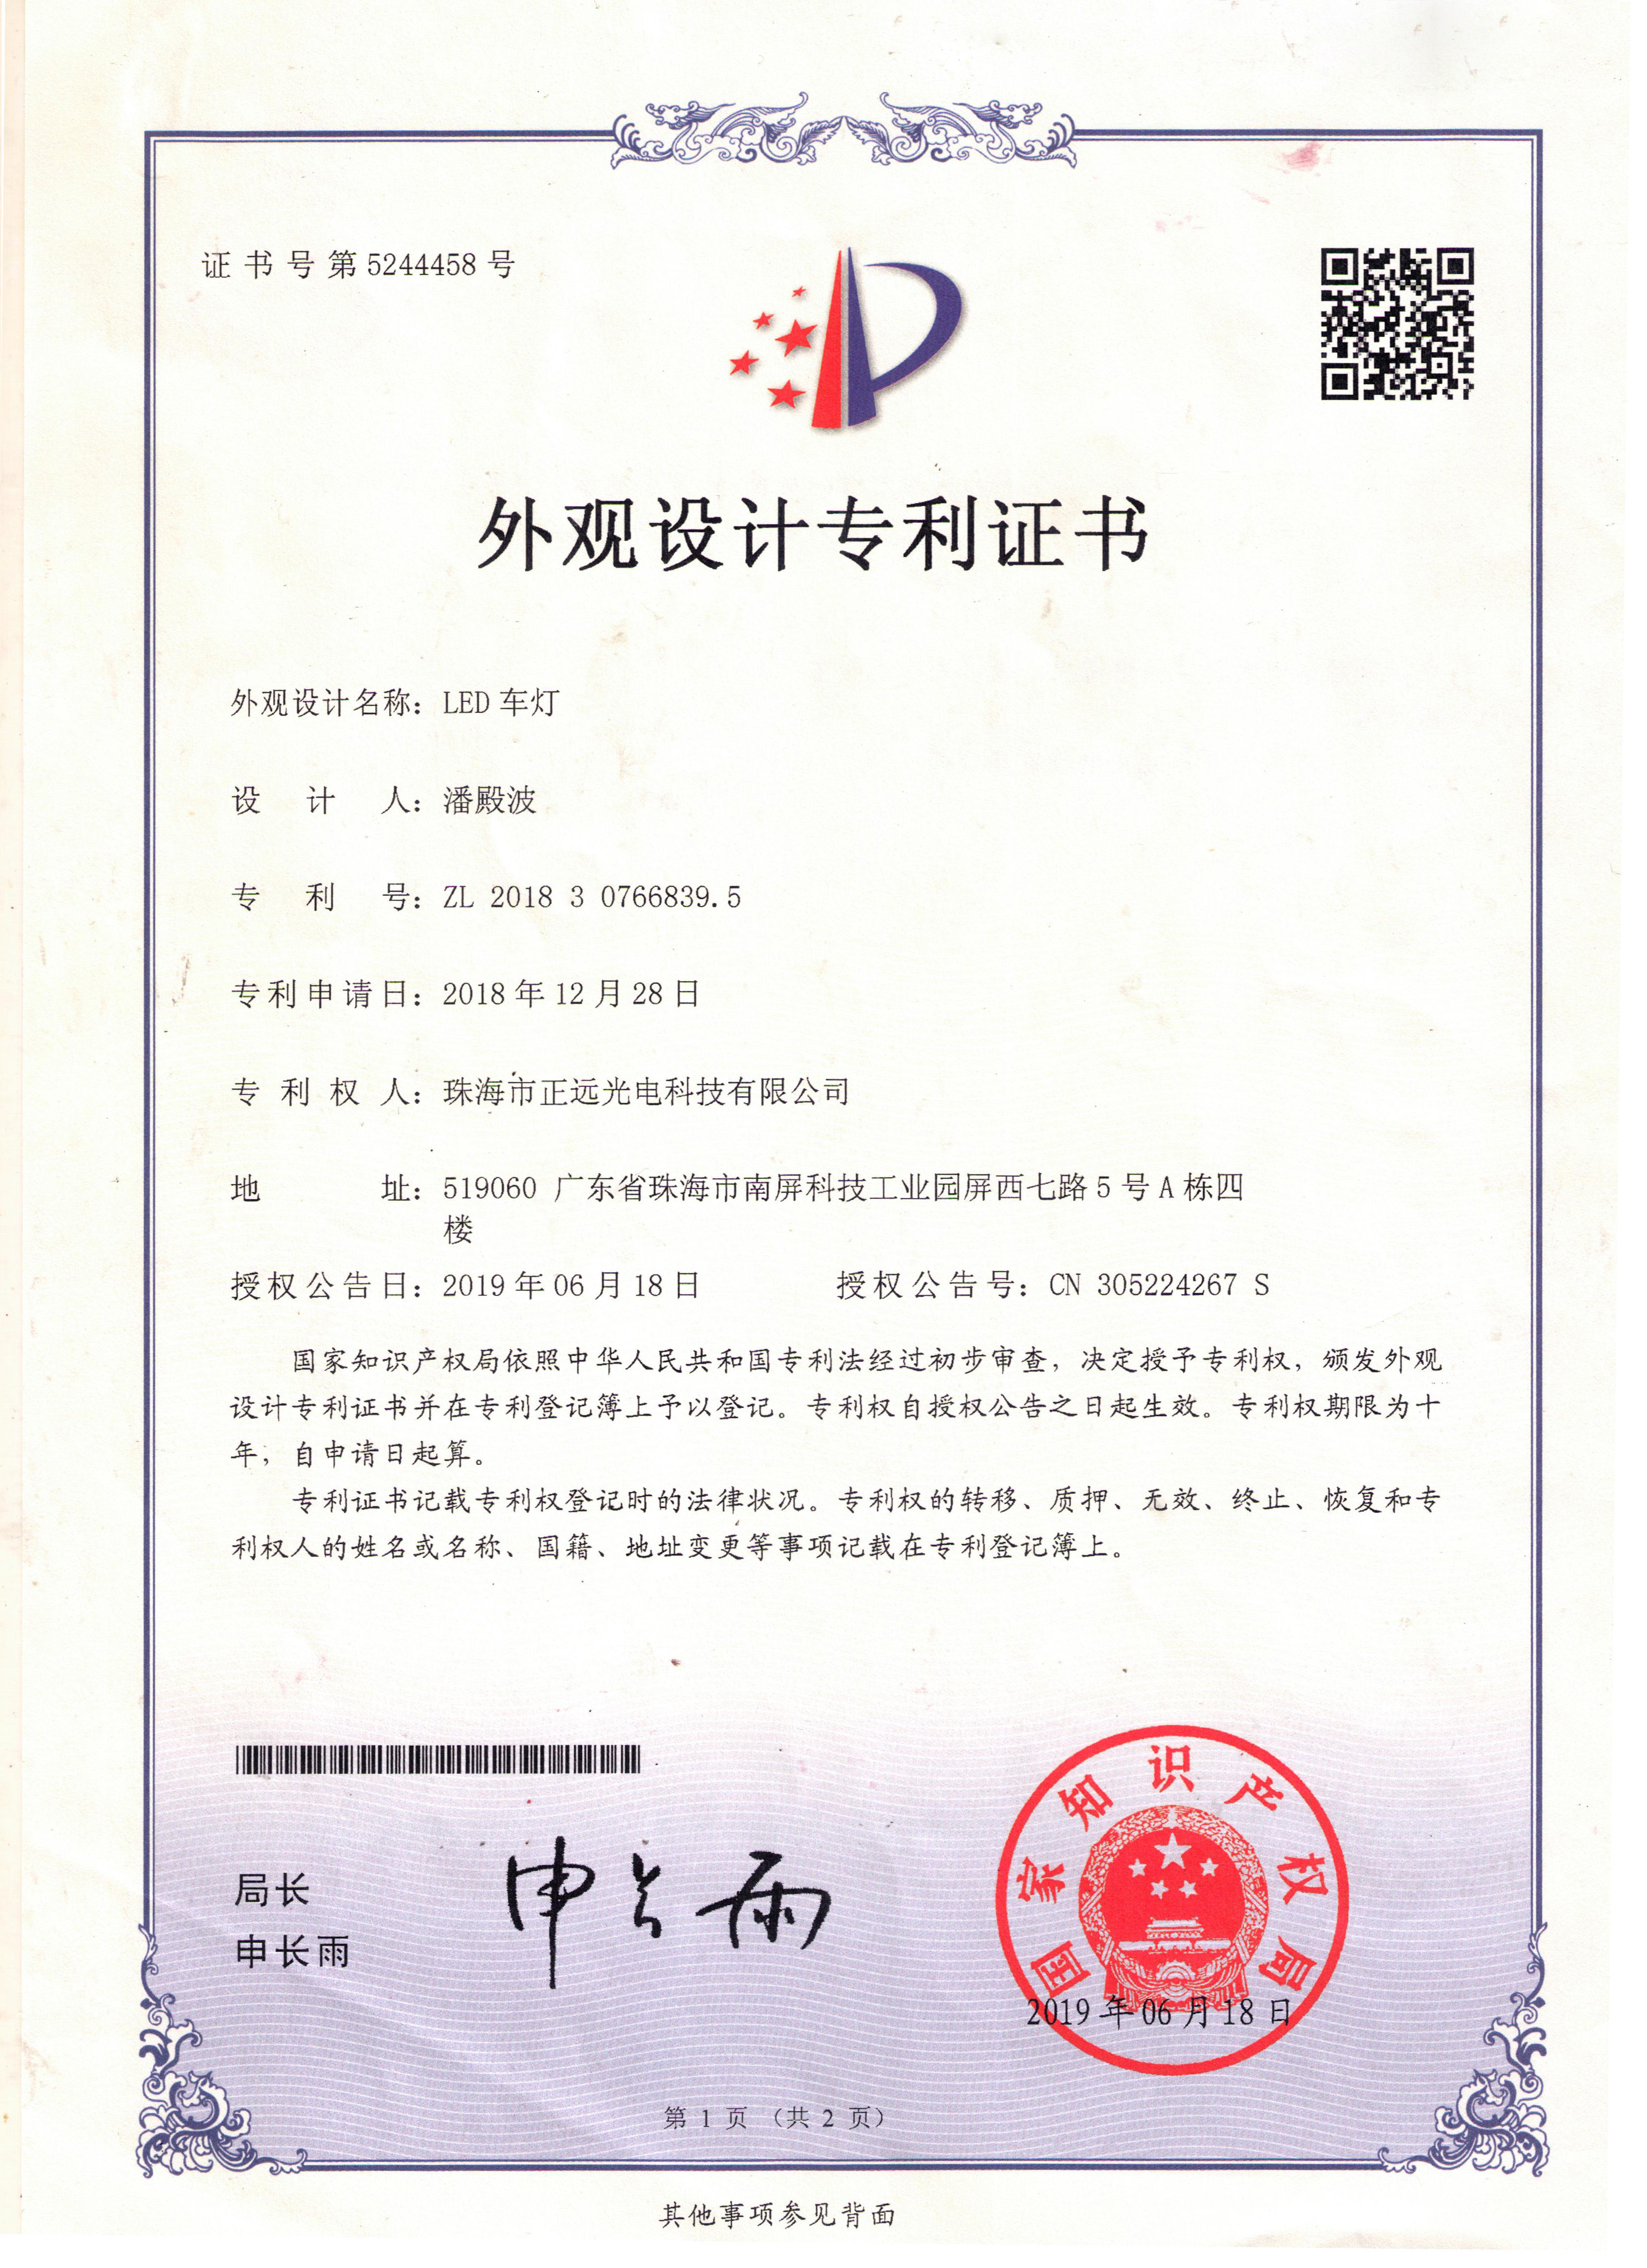  Appearance patent certificate